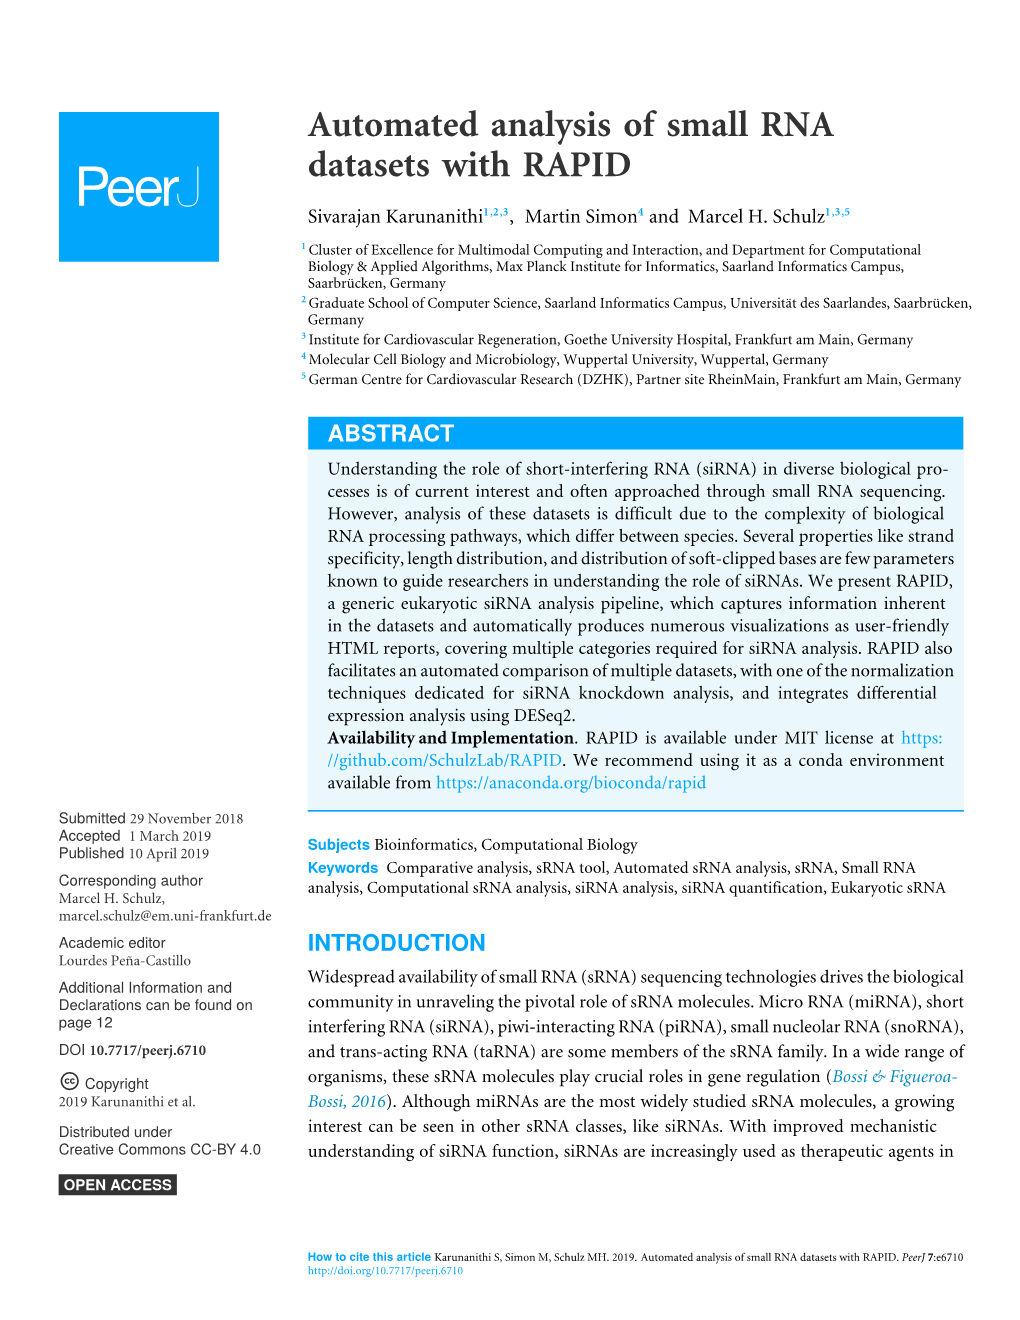 Automated Analysis of Small RNA Datasets with RAPID